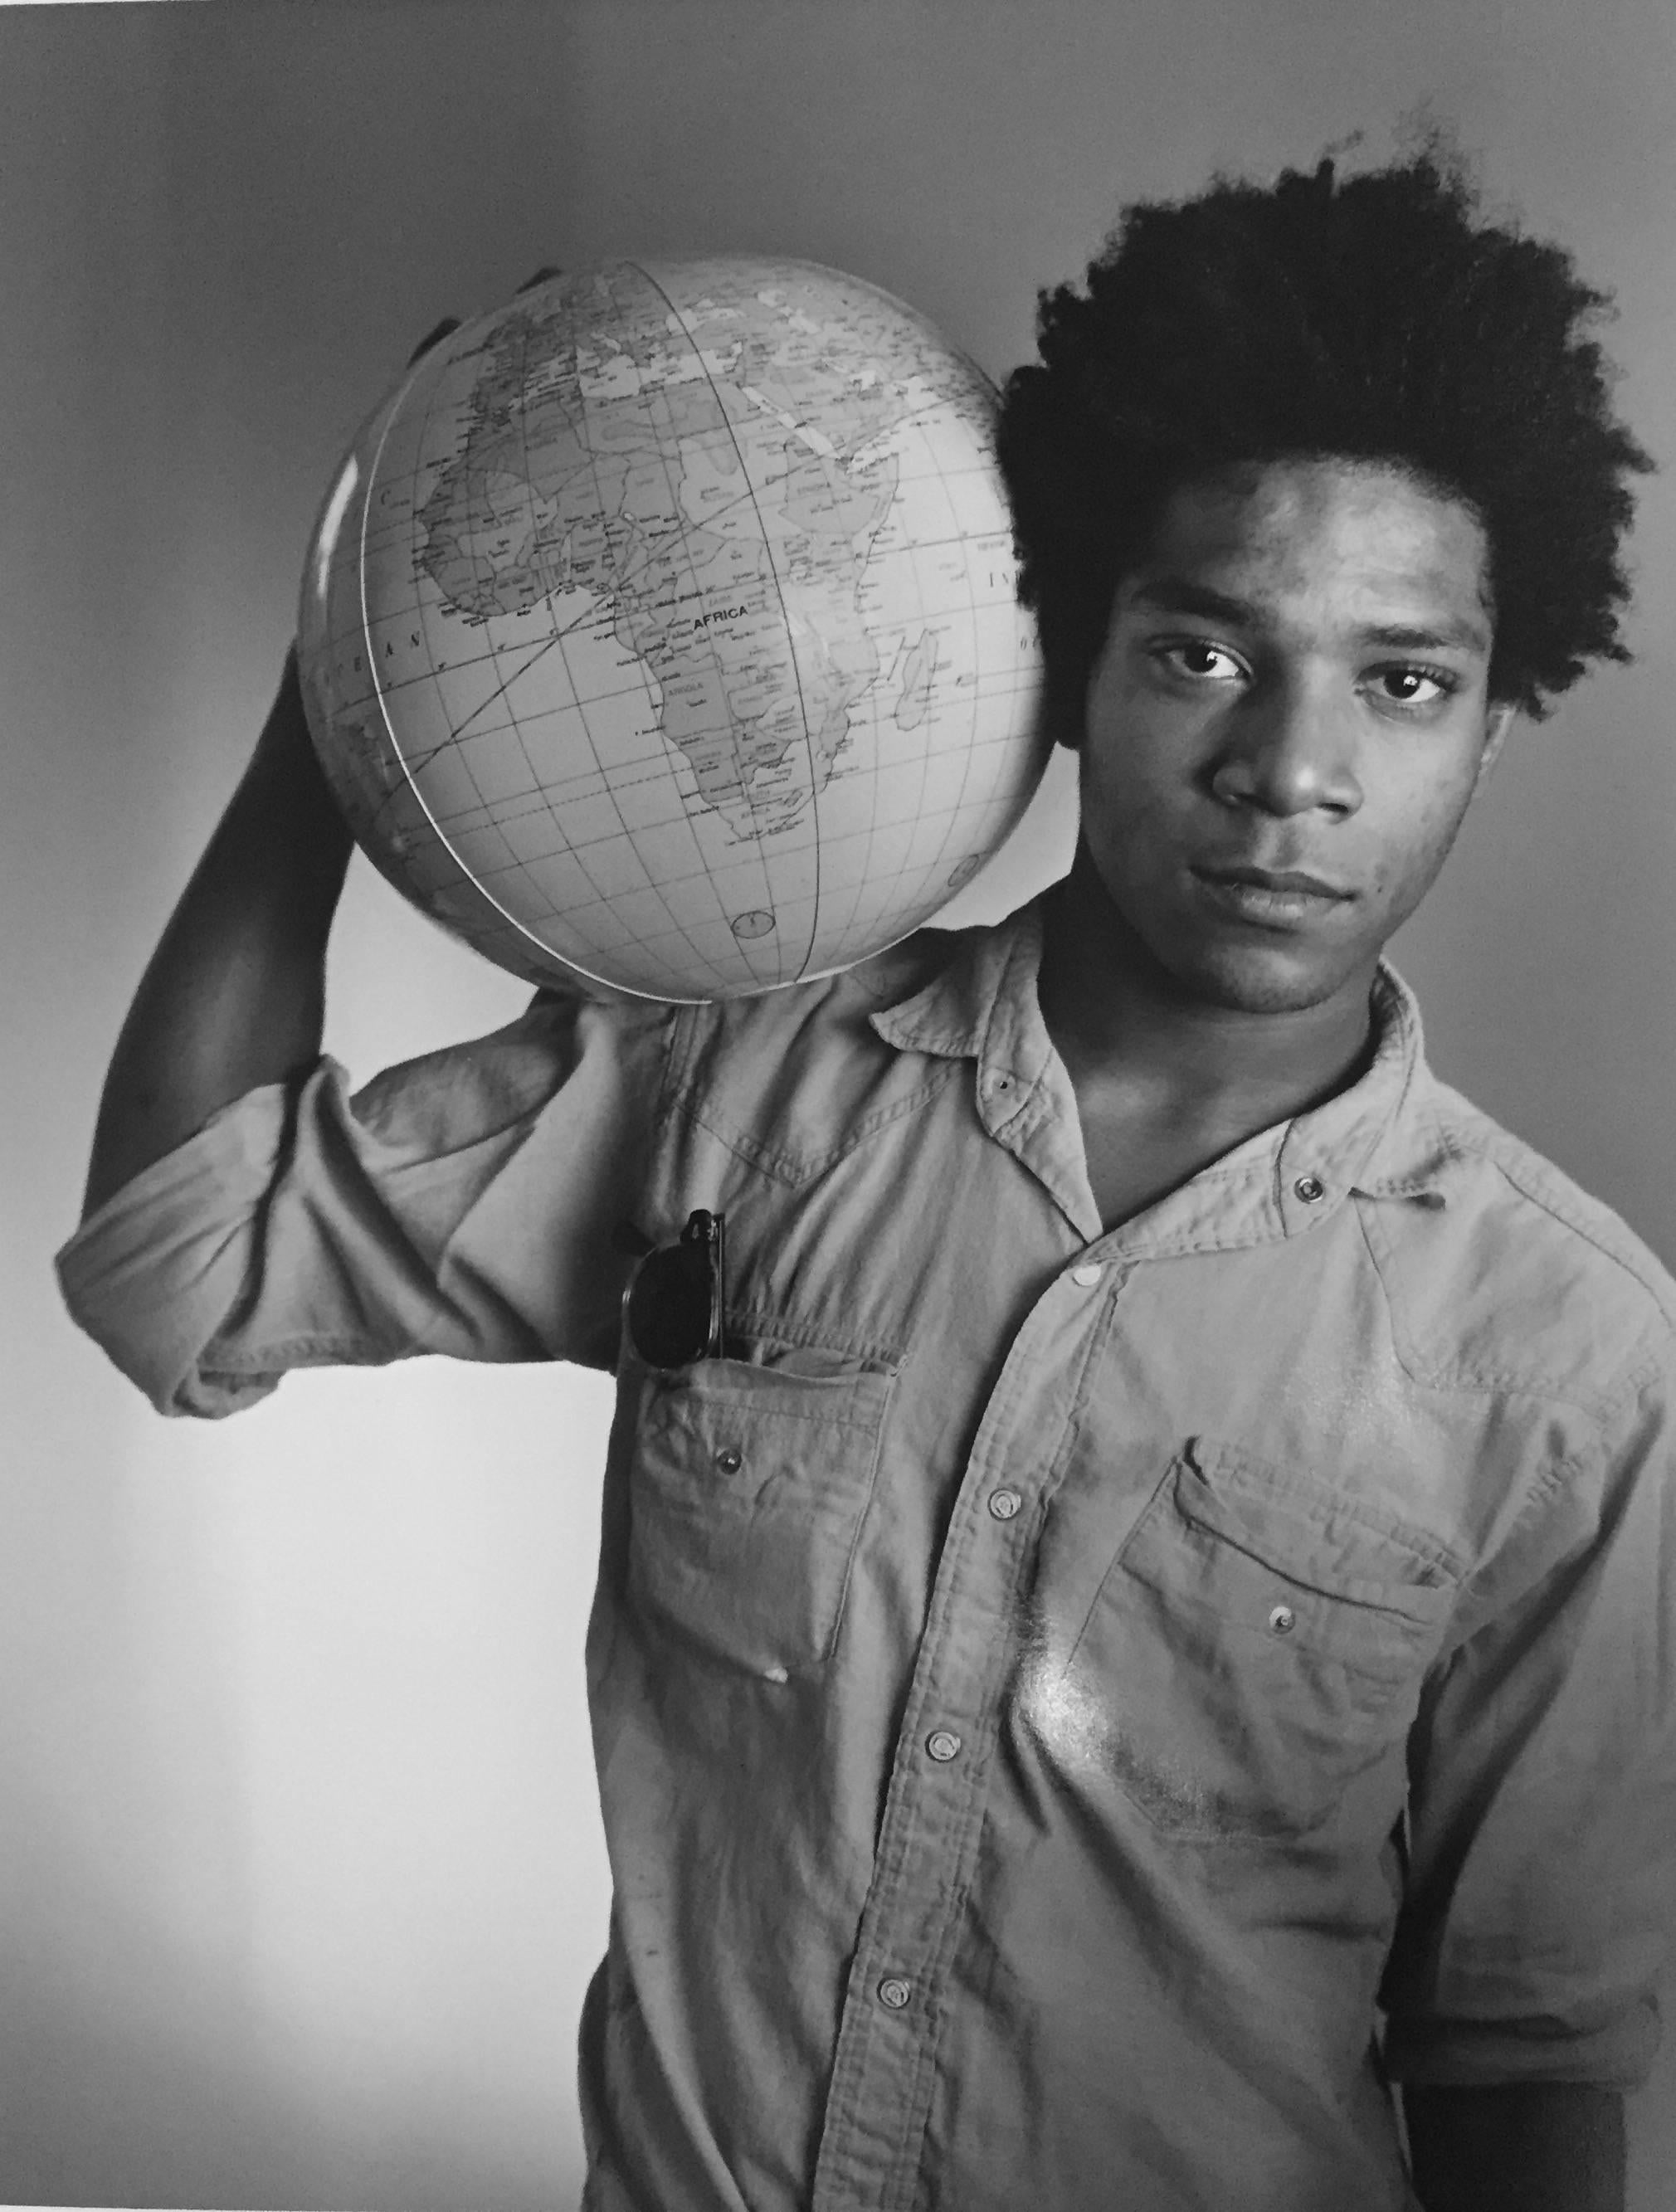 Untitled (Basquiat with Globe), Edition of 250 - Photograph by Christopher Makos